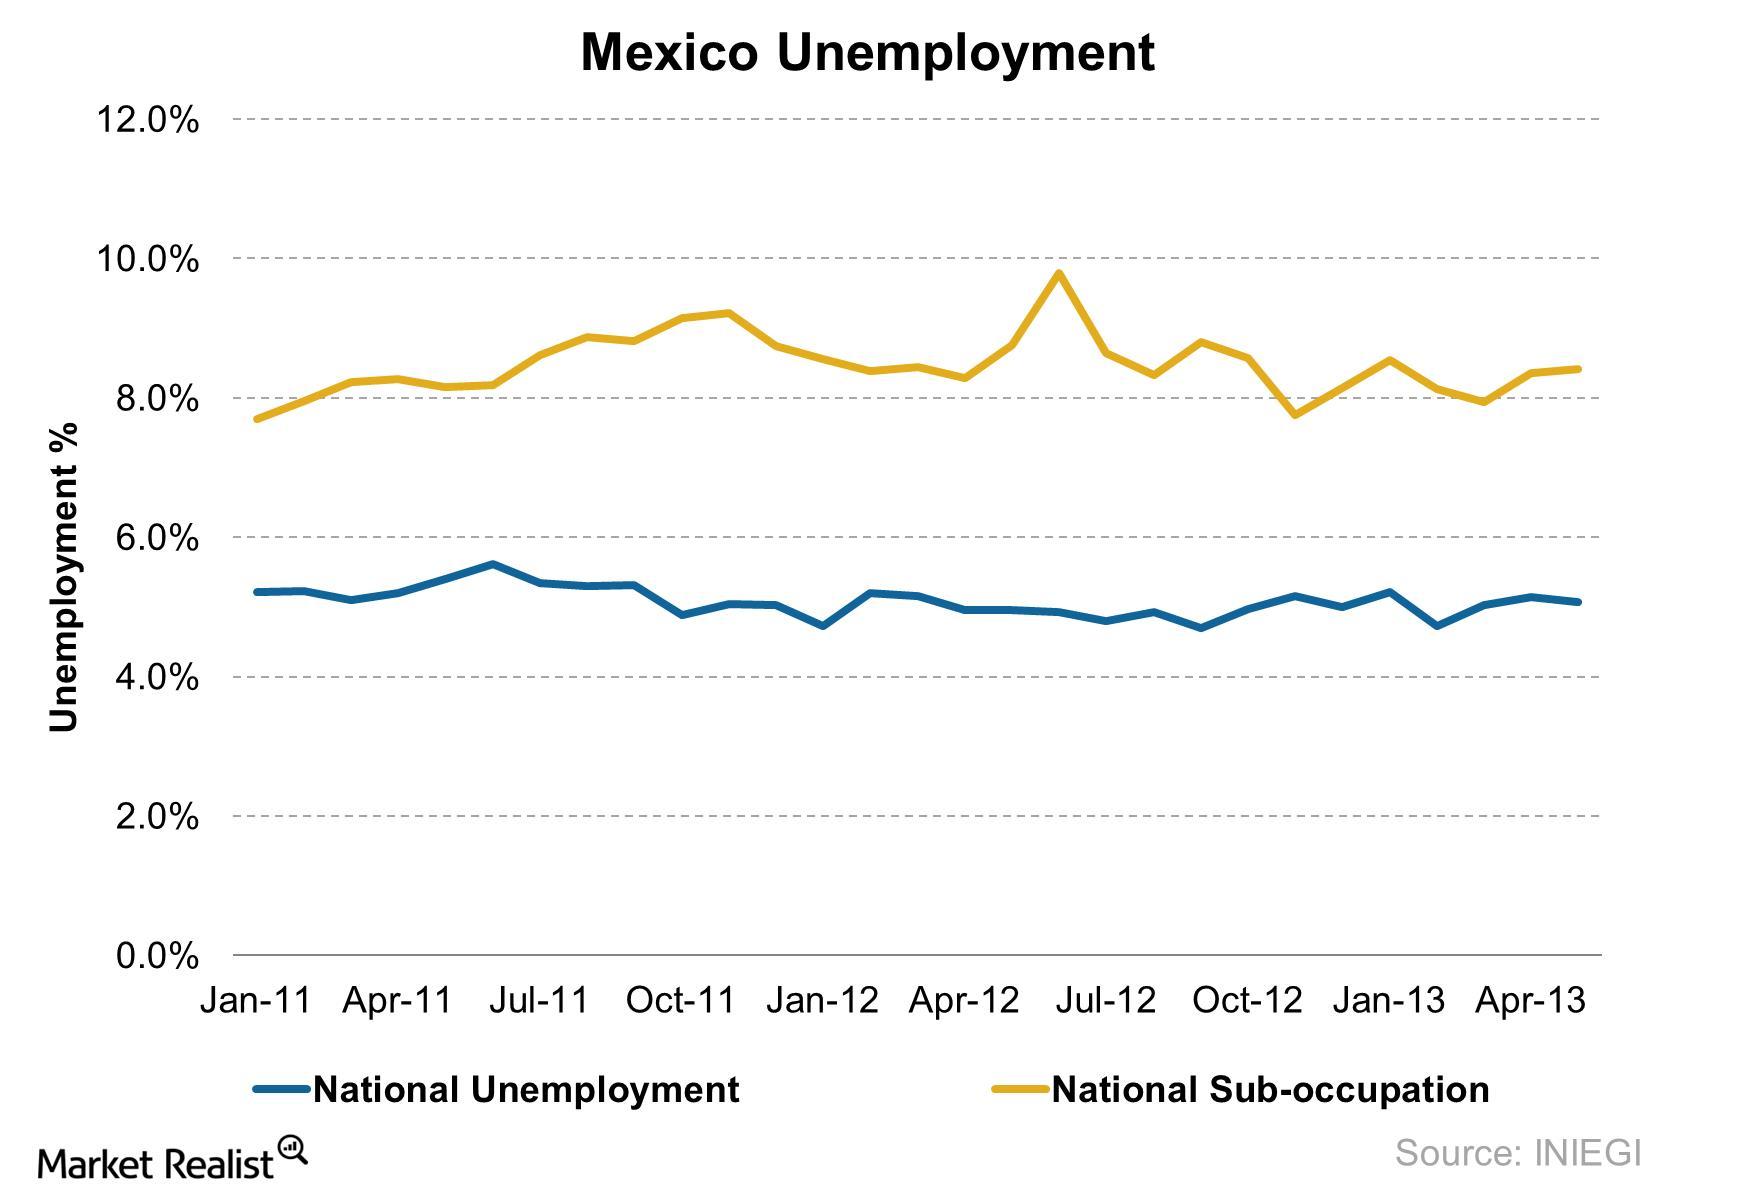 Unemployment in Mexico holds steady, finally some good news